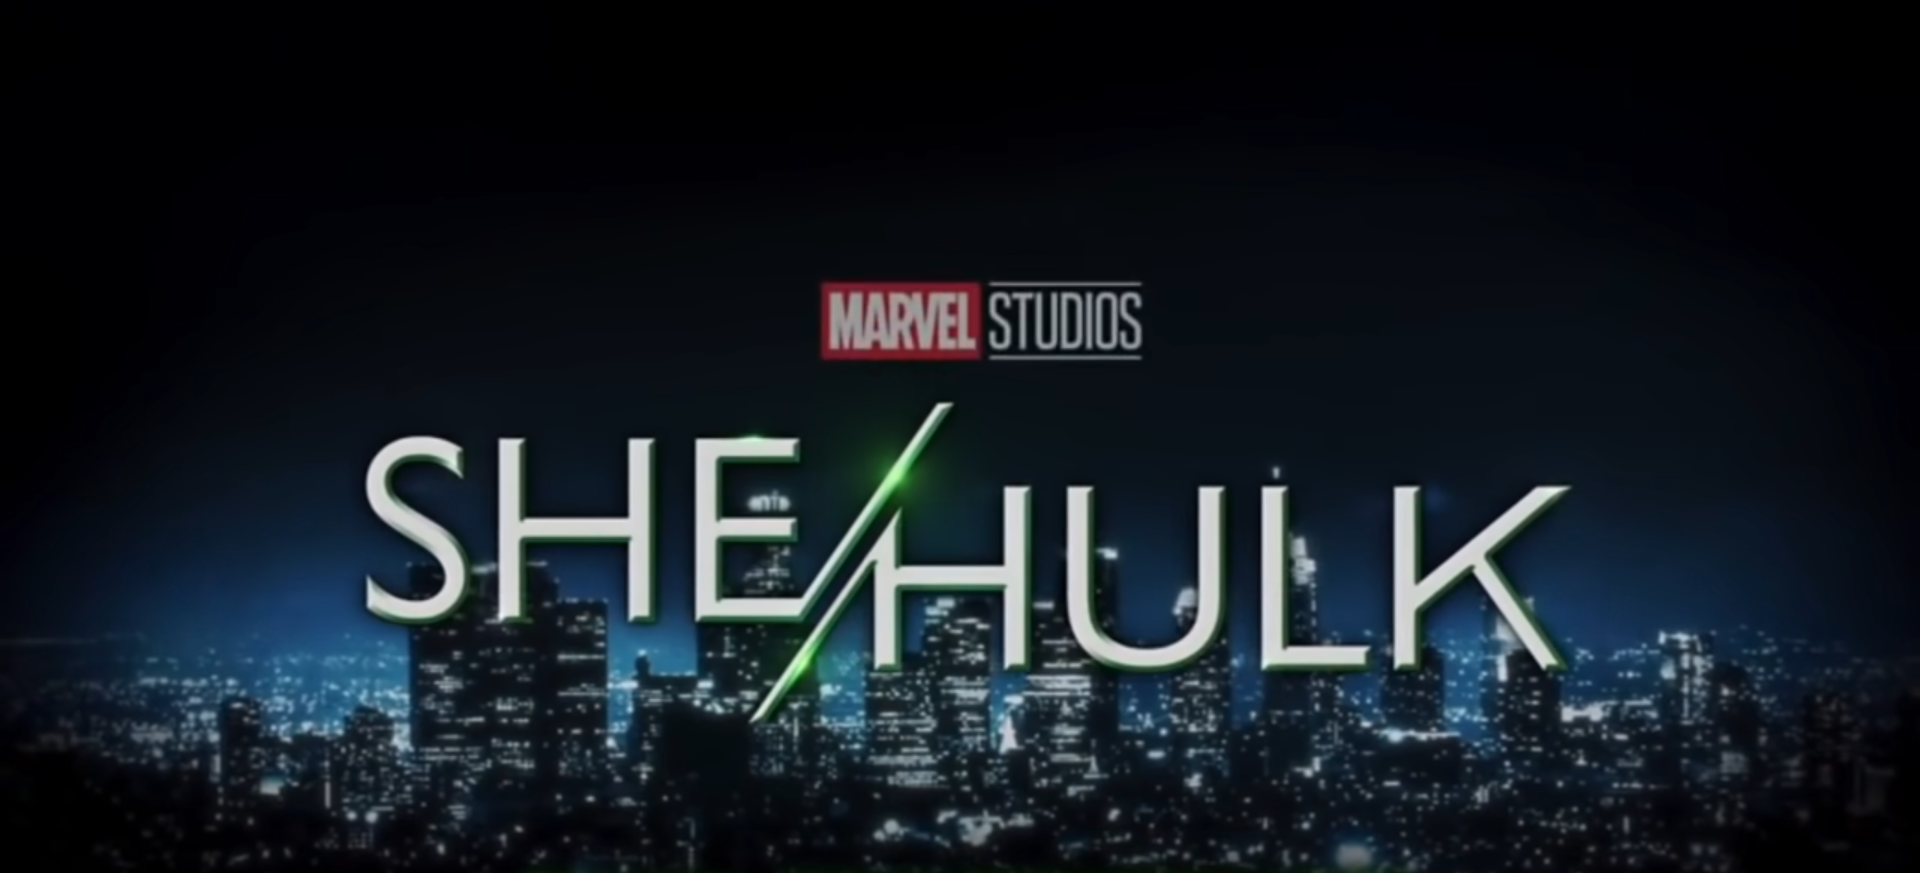 She-Hulk Release Date And New Synopsis Deleted From Official Source